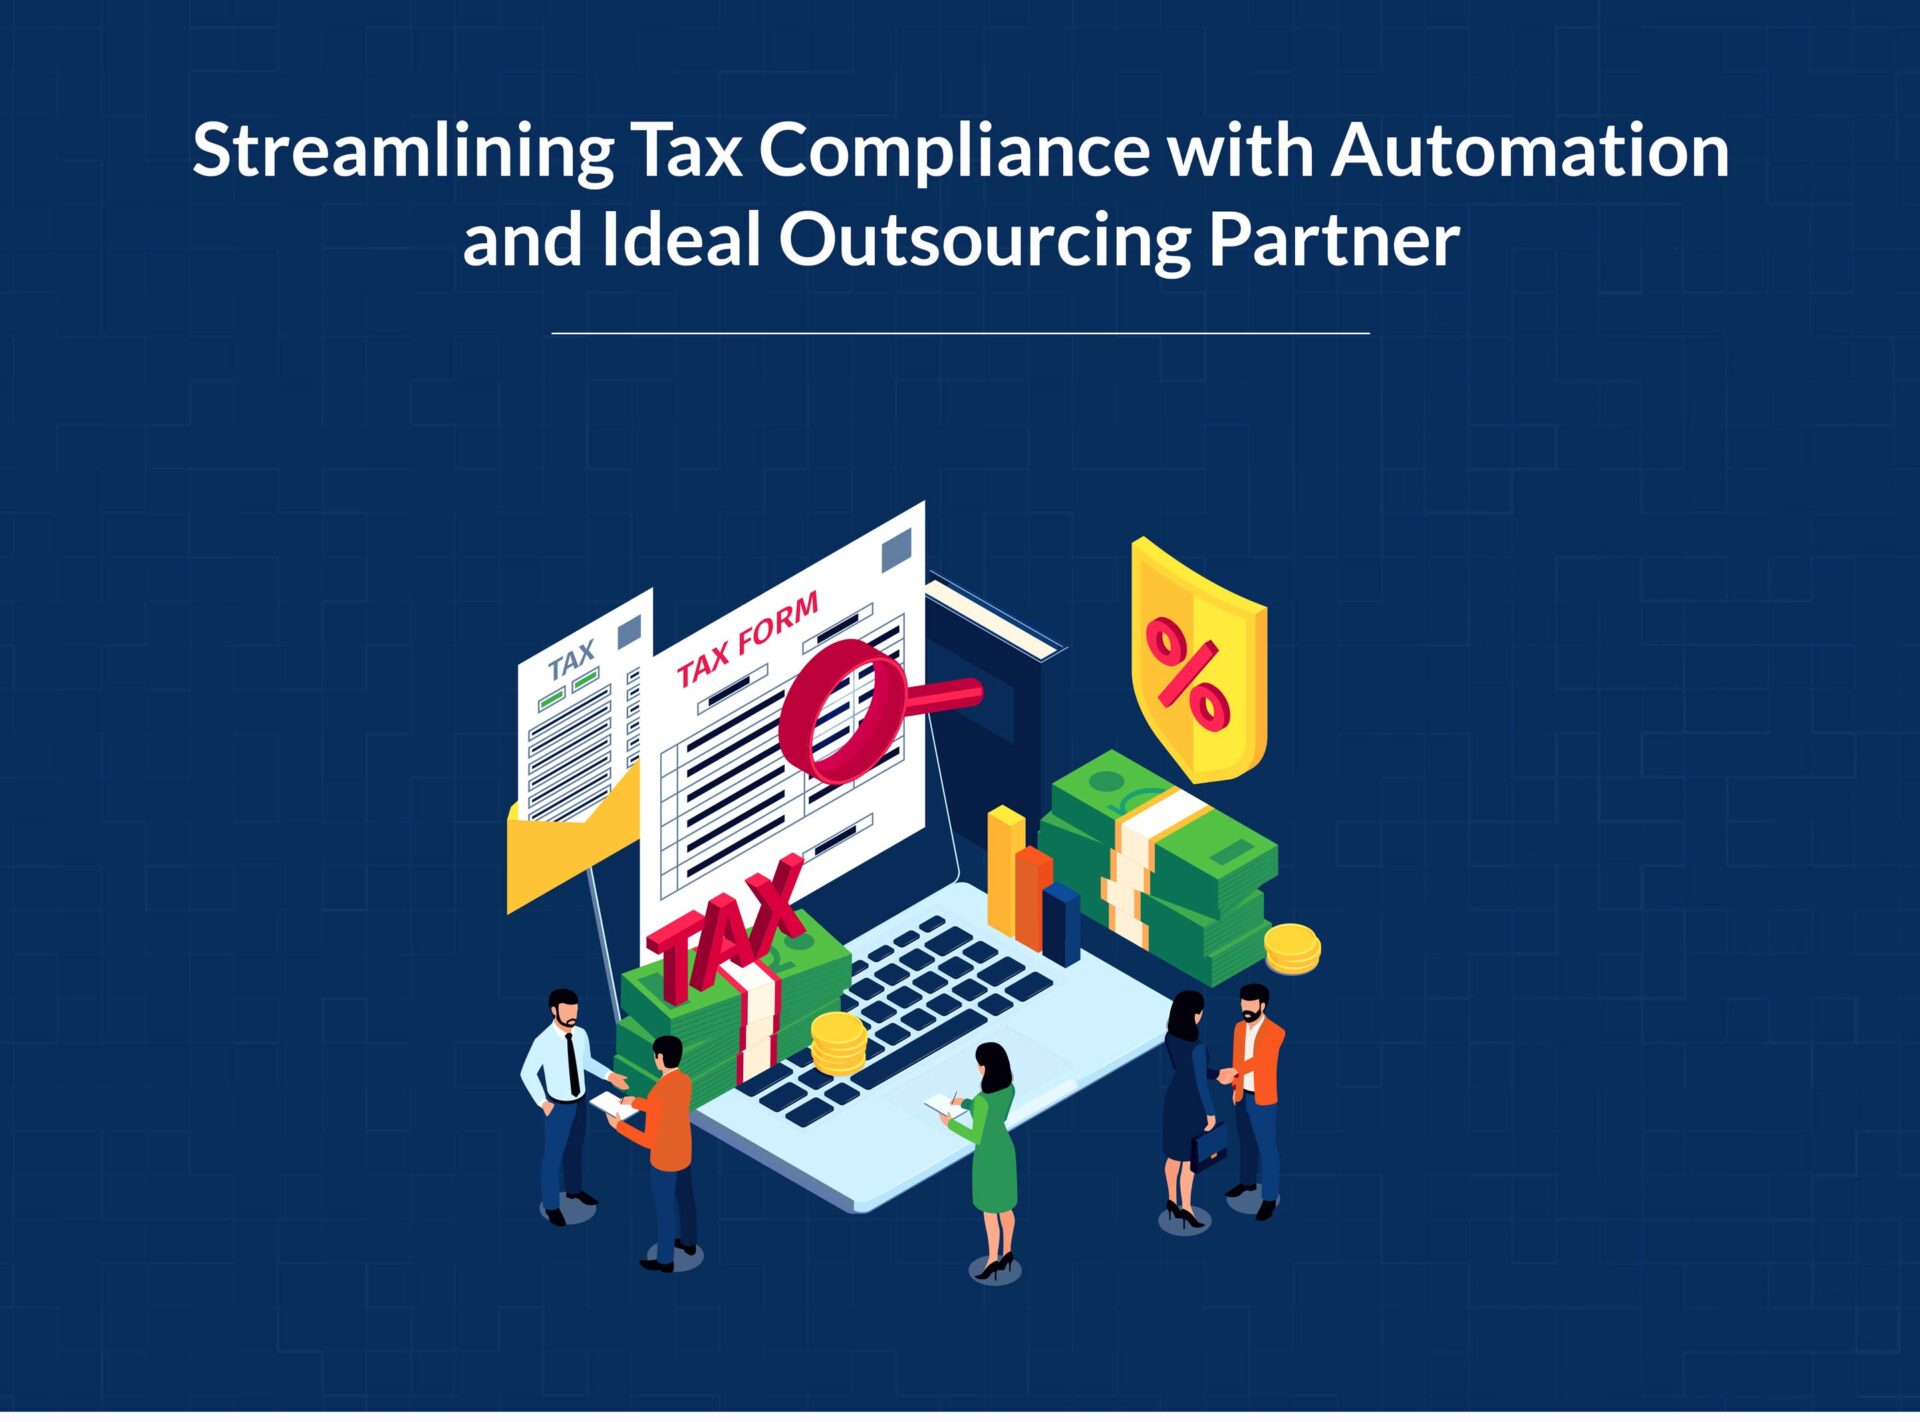 Streamlining Tax Compliance with Automation and Ideal Outsourcing Partner